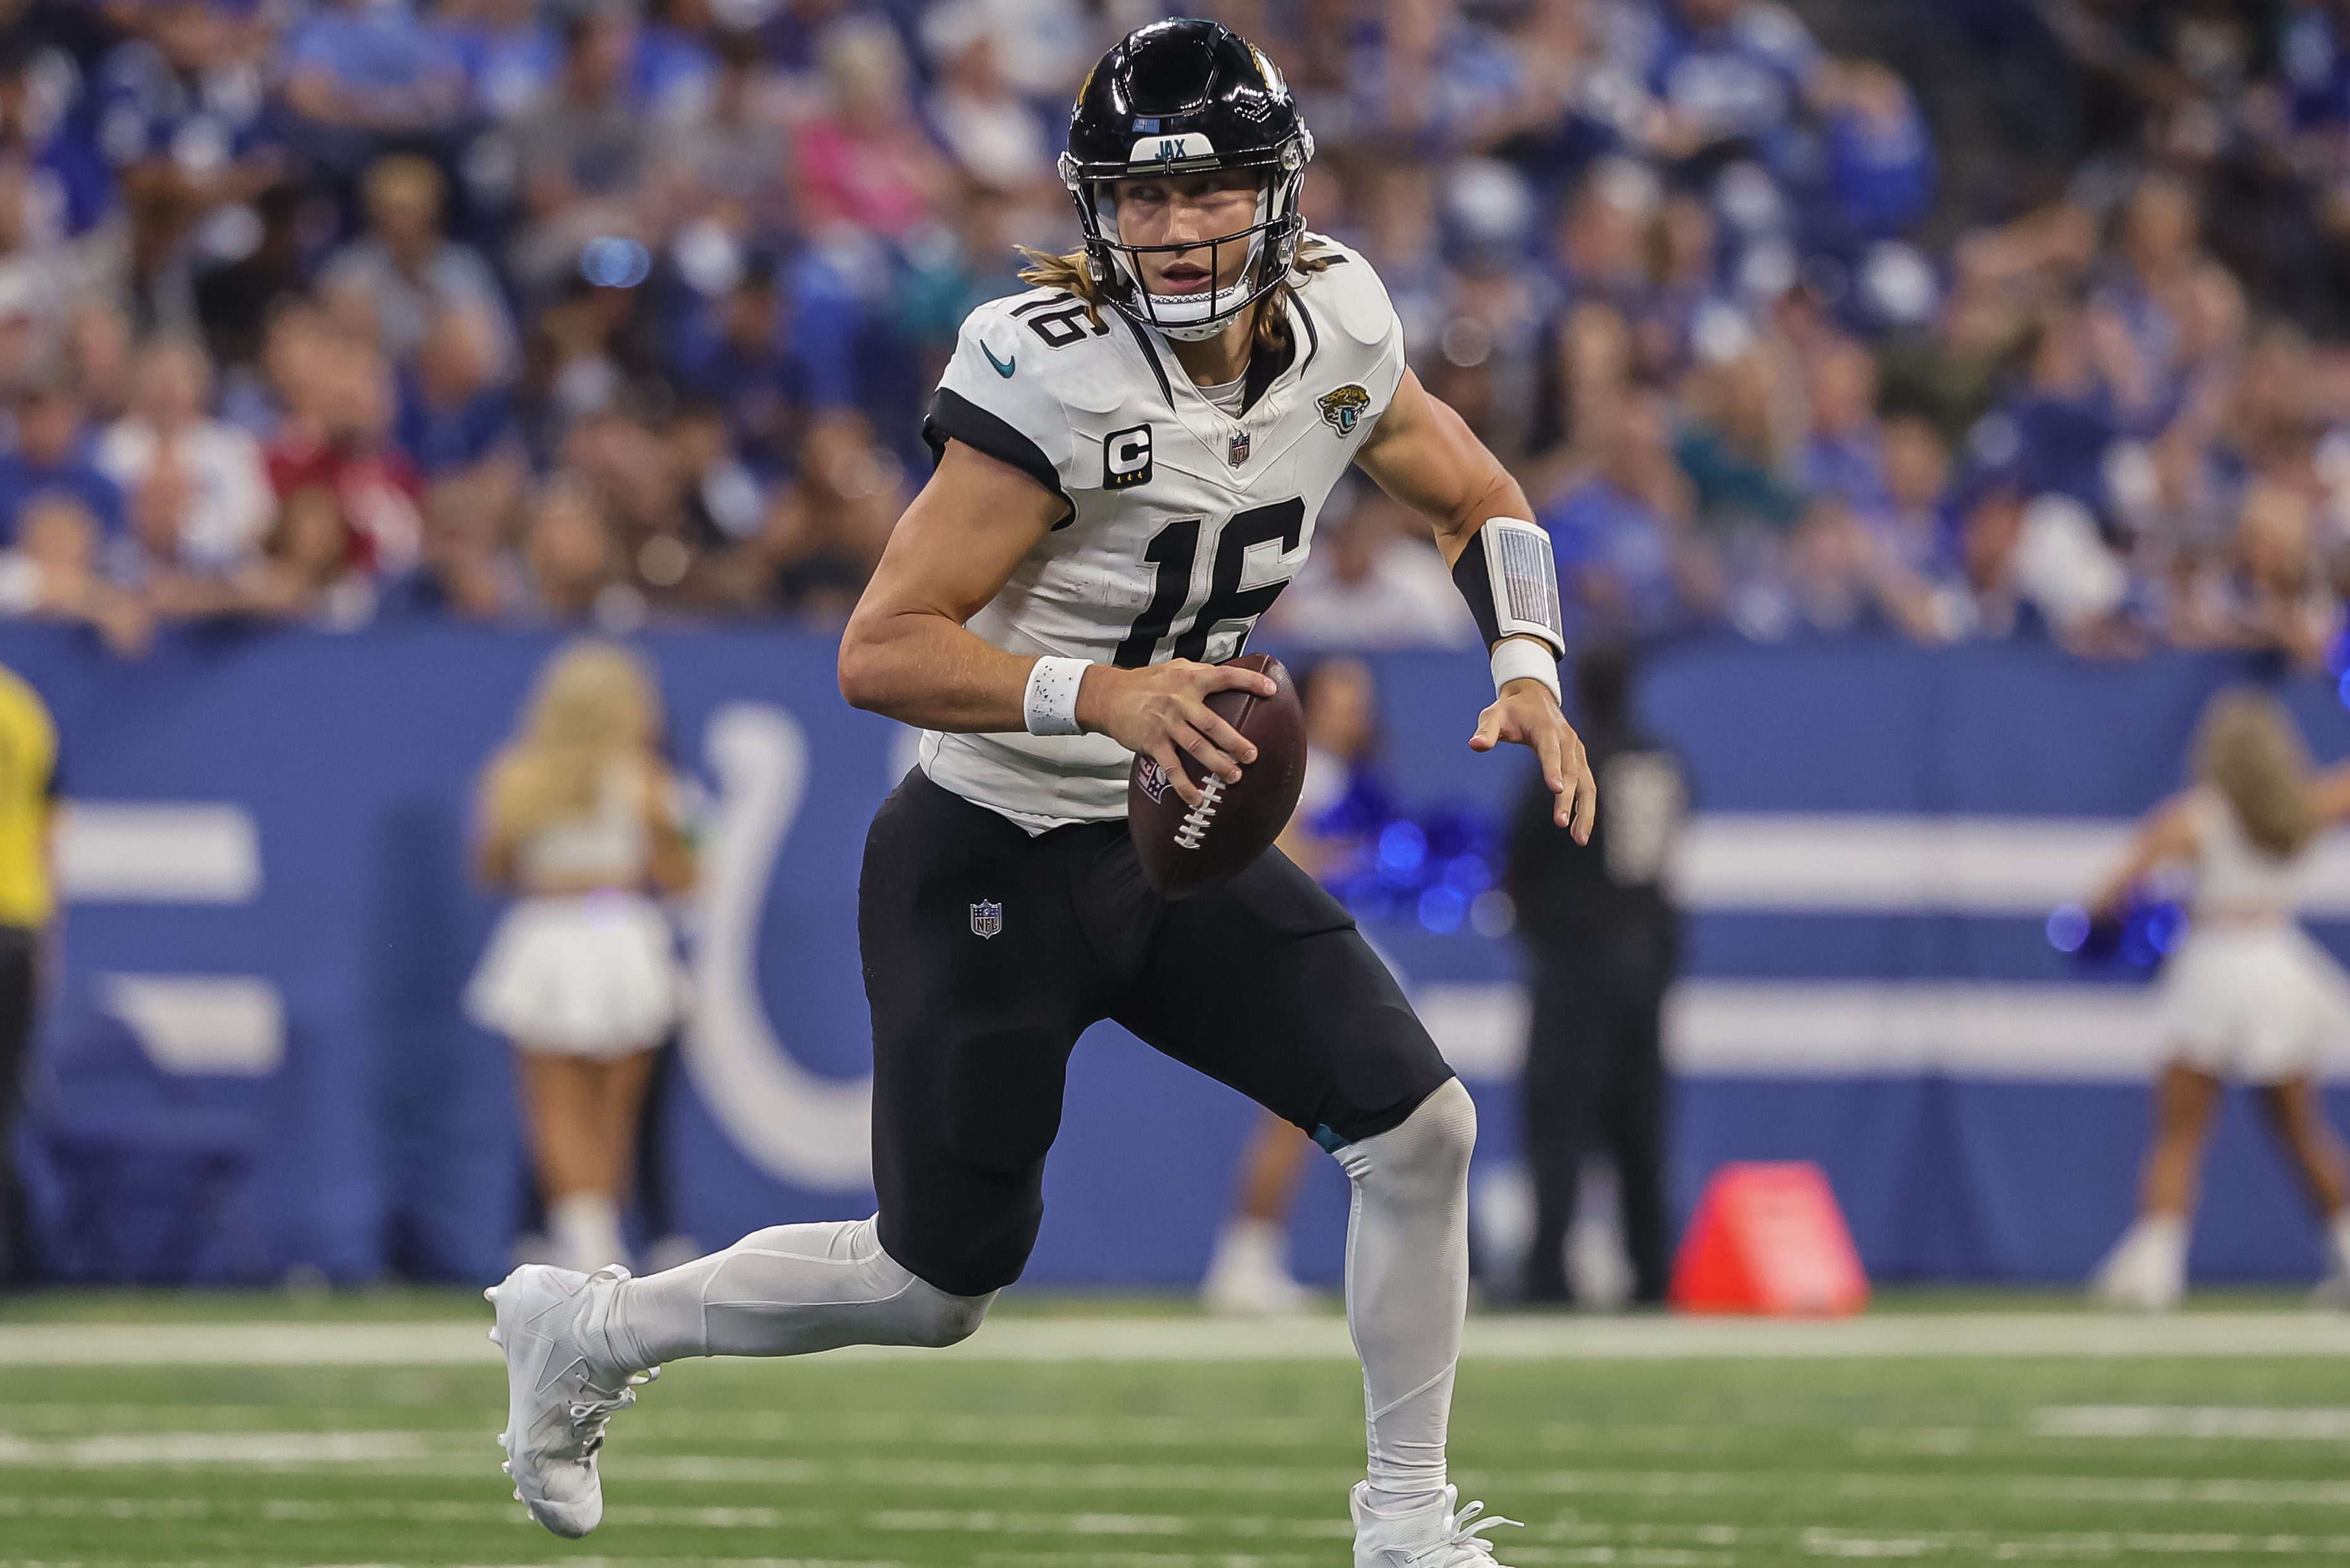 Top NFL Storylines of Week 1: Pat Mahomes and Trevor Lawrence - InsideHook